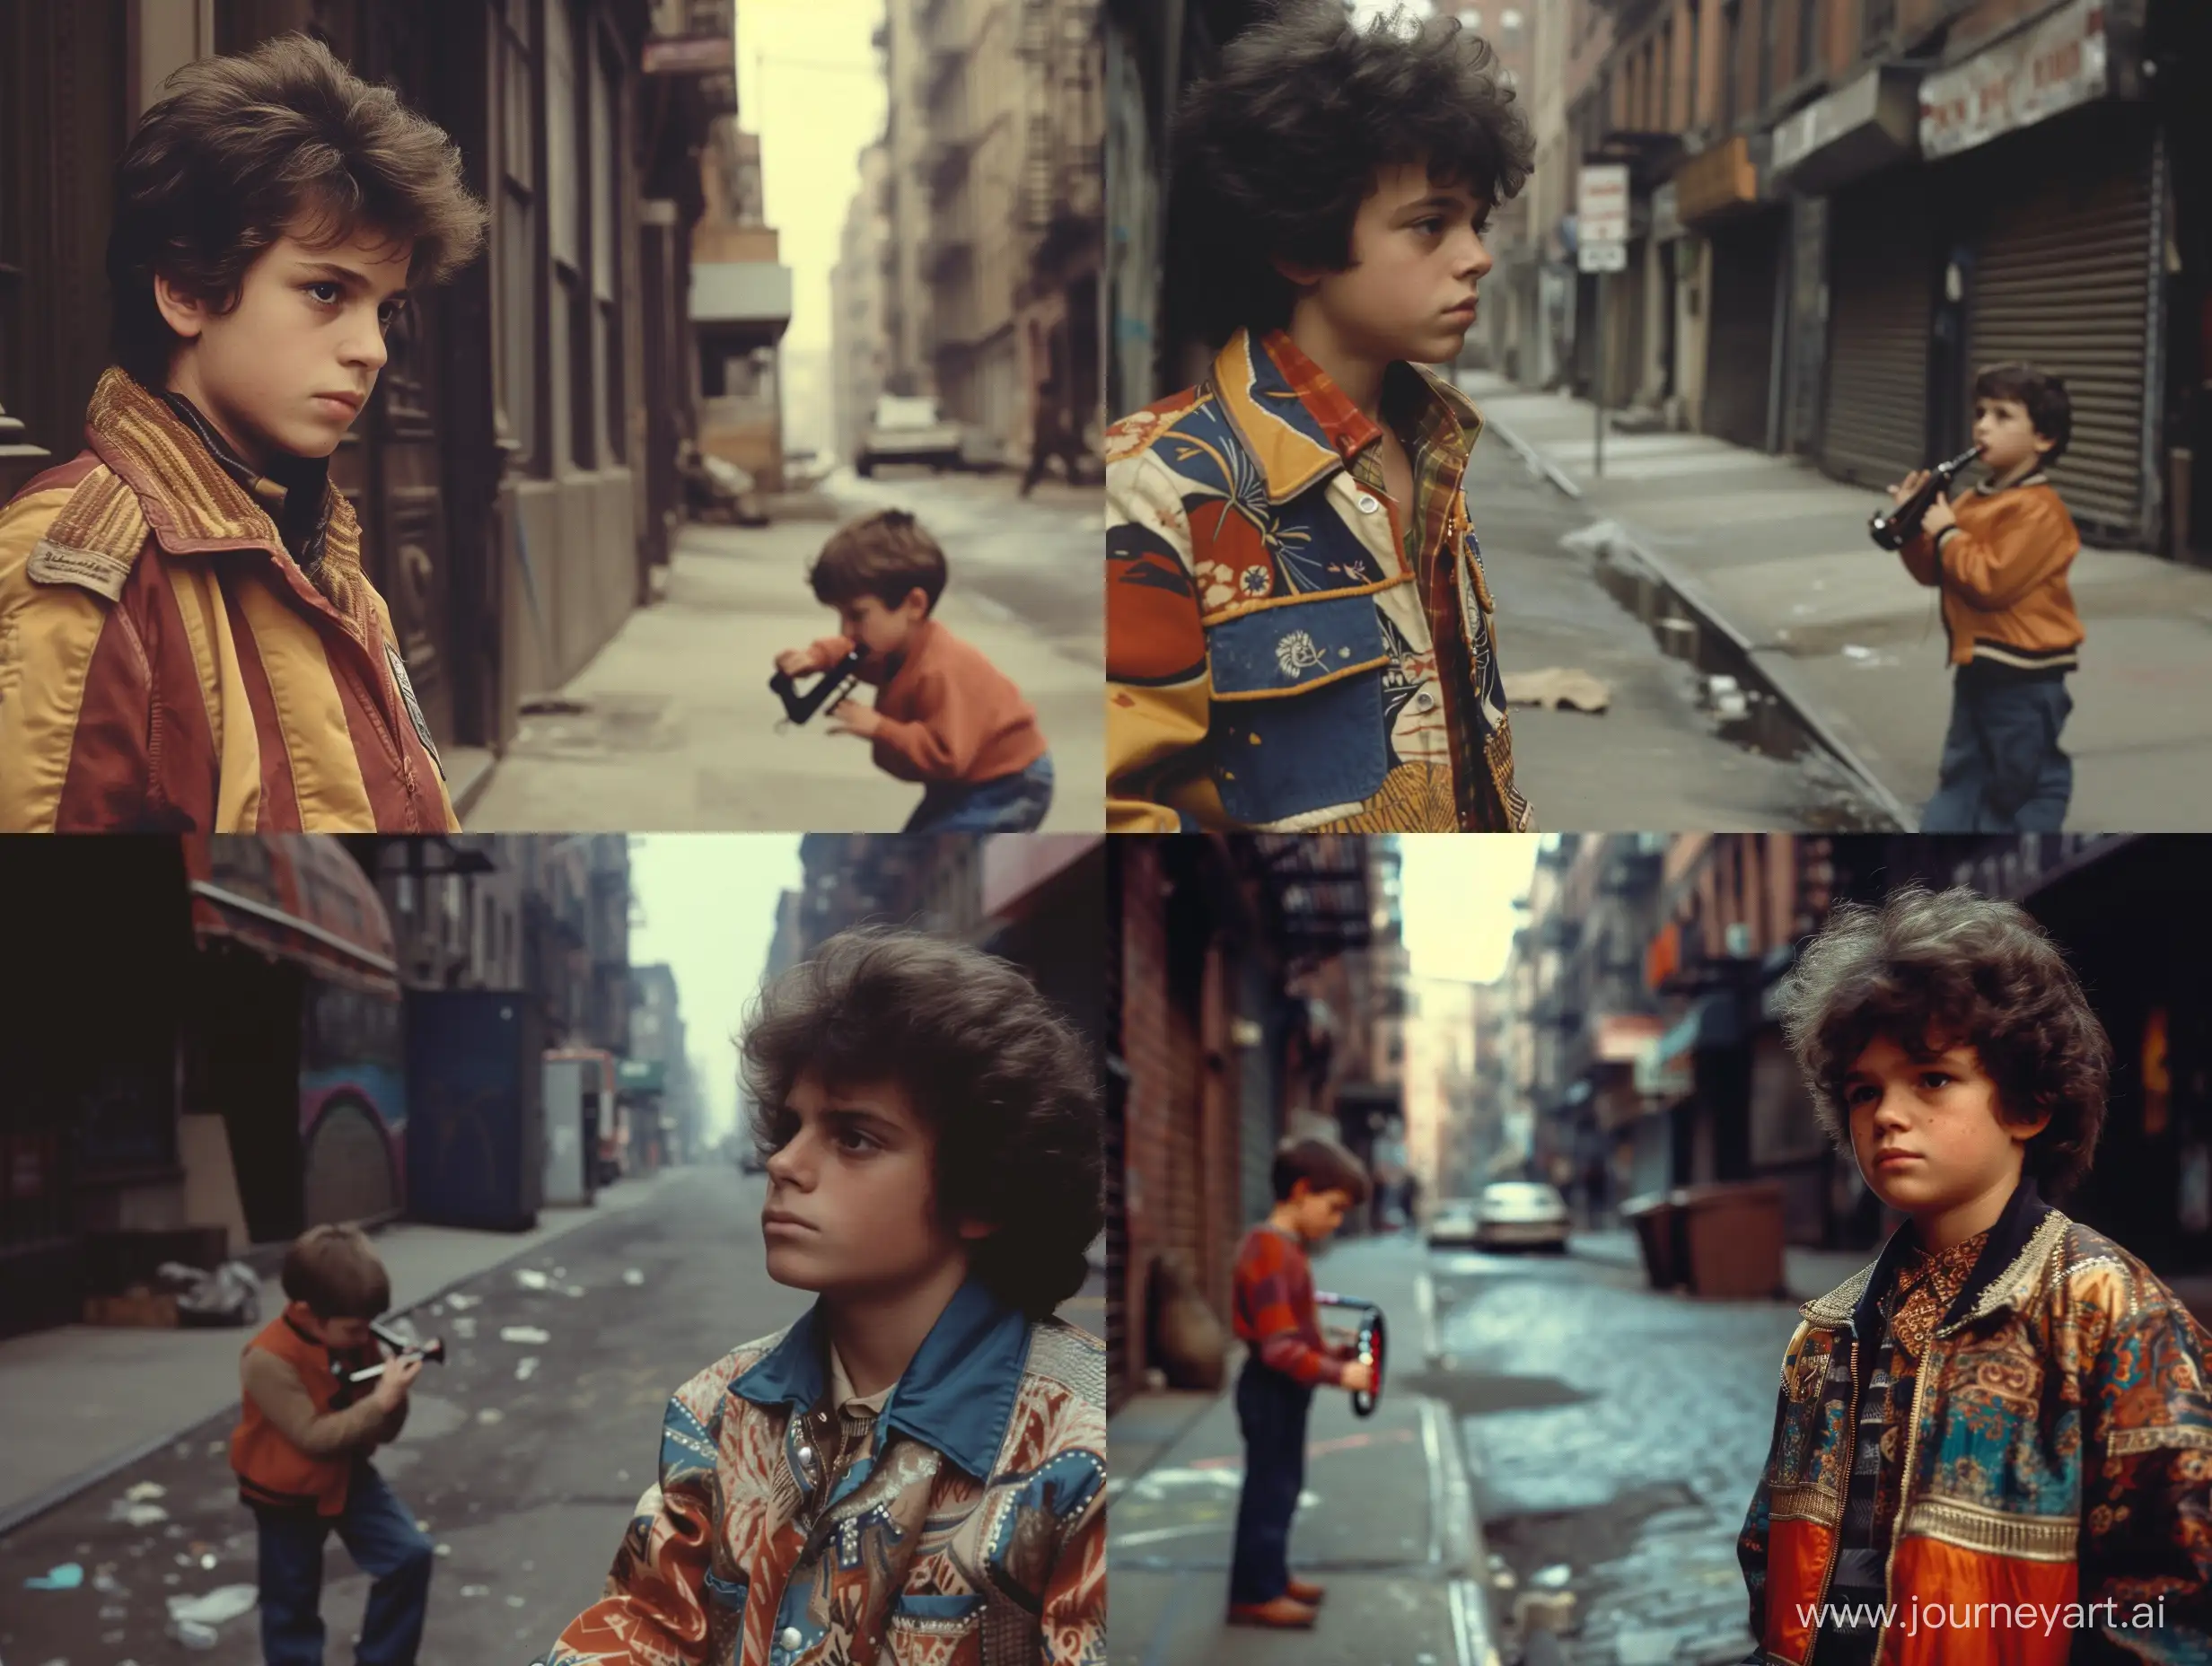 A young Billy Joel in 1970s jacket and hairstyle standing by a melancholic New York street, watching a kid boy playing harmonica on the street, atmospheric scene, depth of field